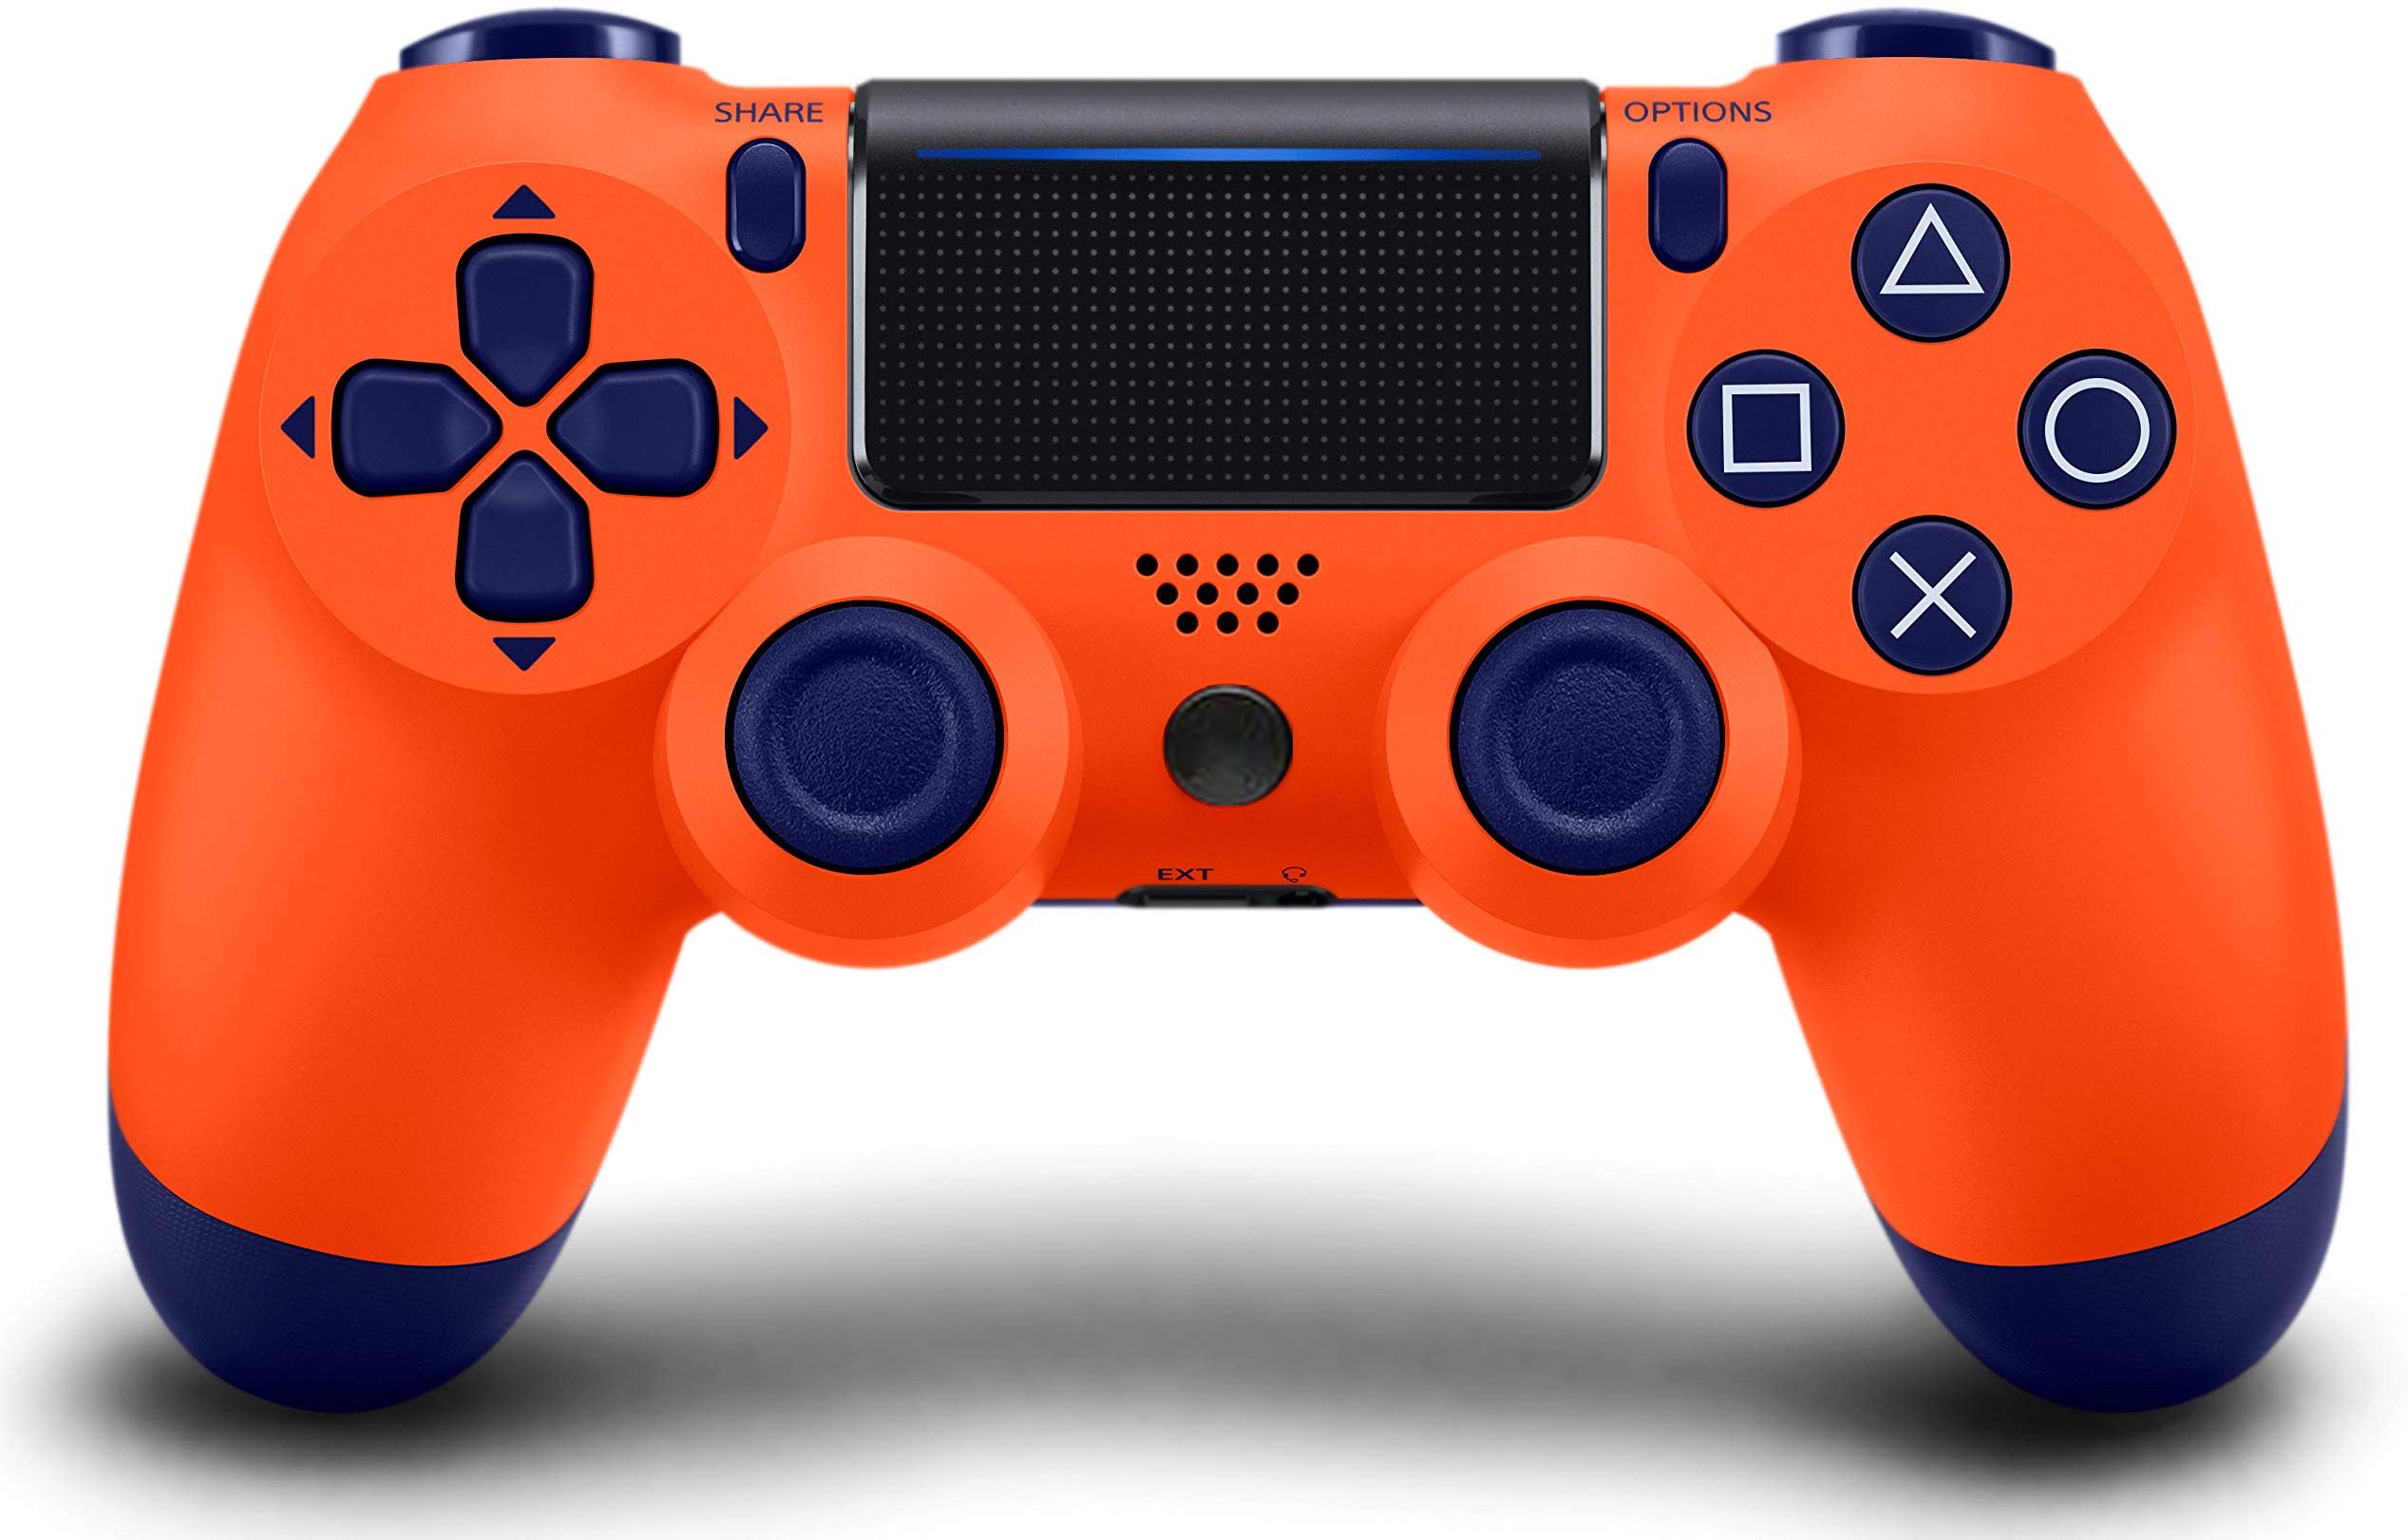 ps4 remote game controllers